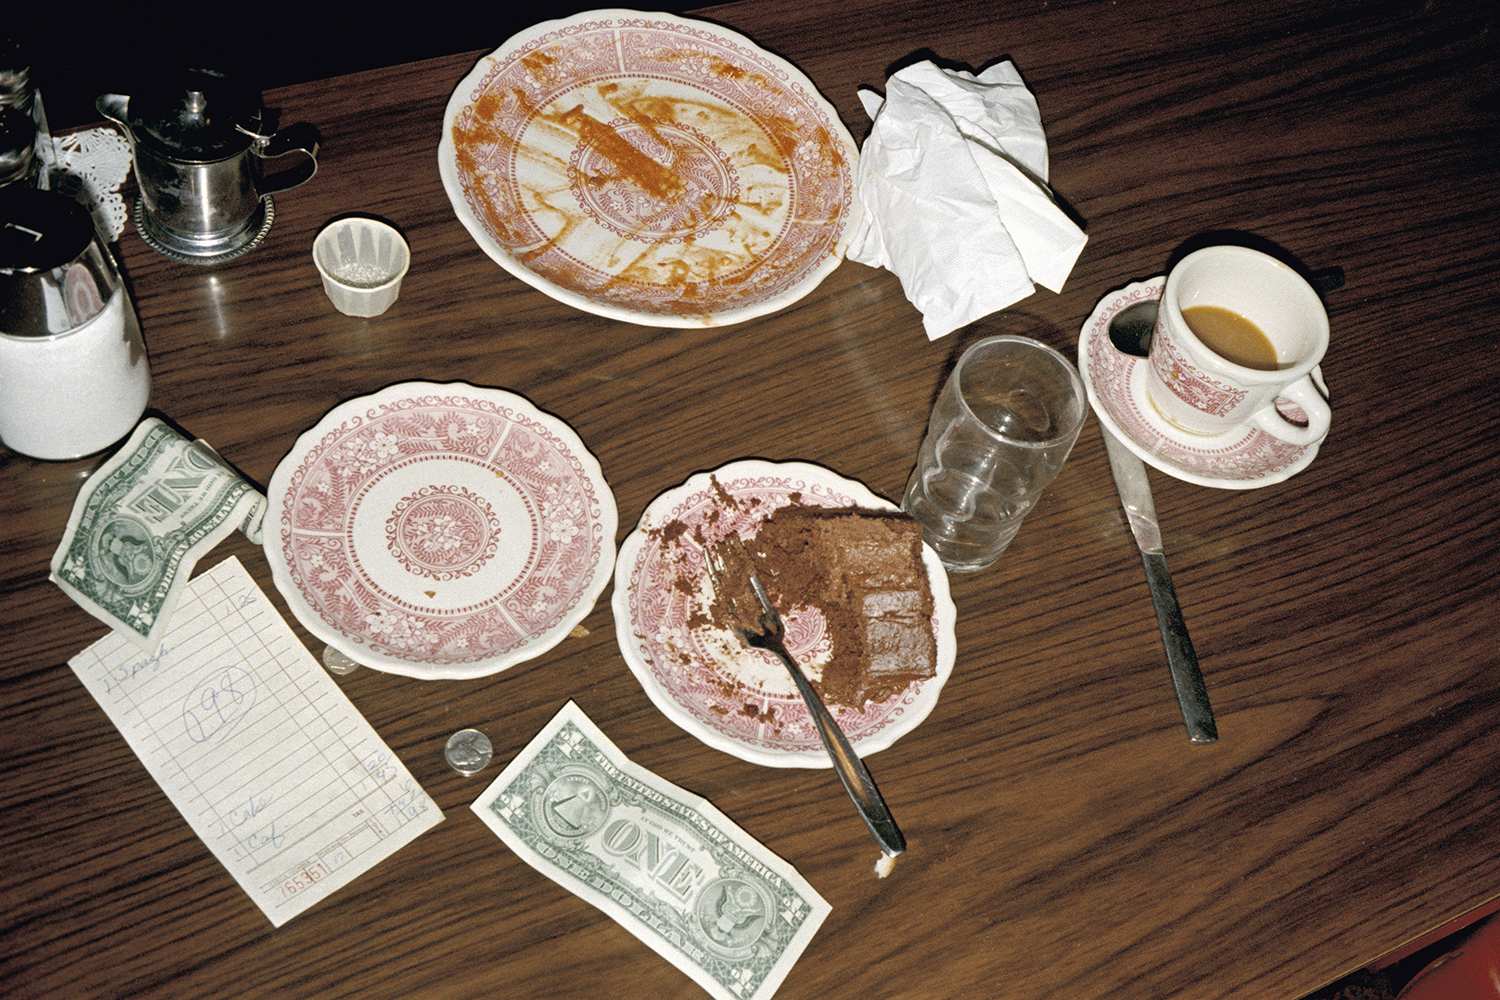 INTERVIEW: Stephen Shore: 'The current moment recontextualises the 